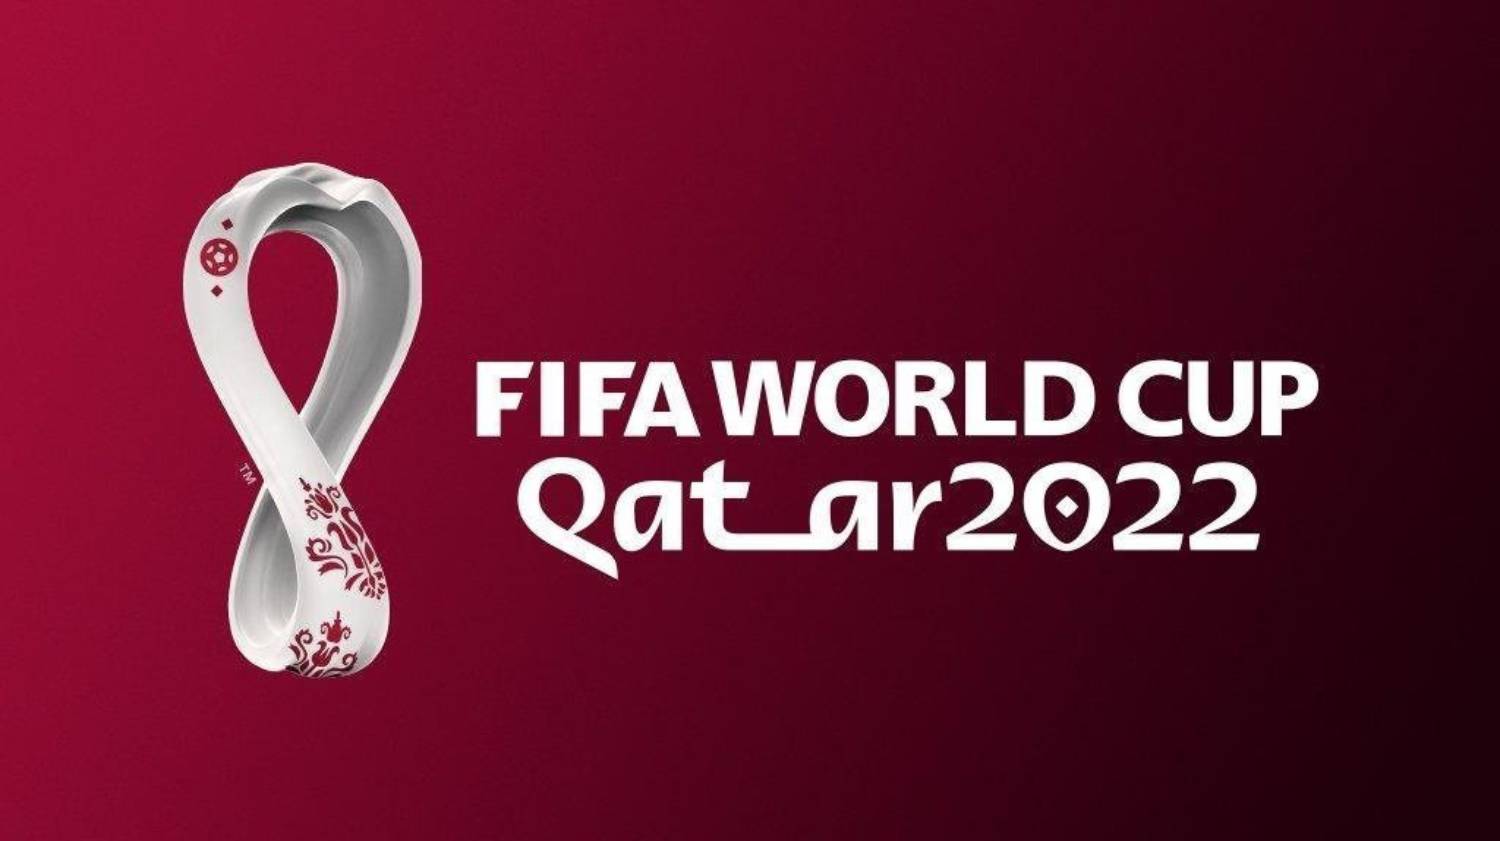 Qatar 2022 World Cup commercial guide: Every team, every sponsor